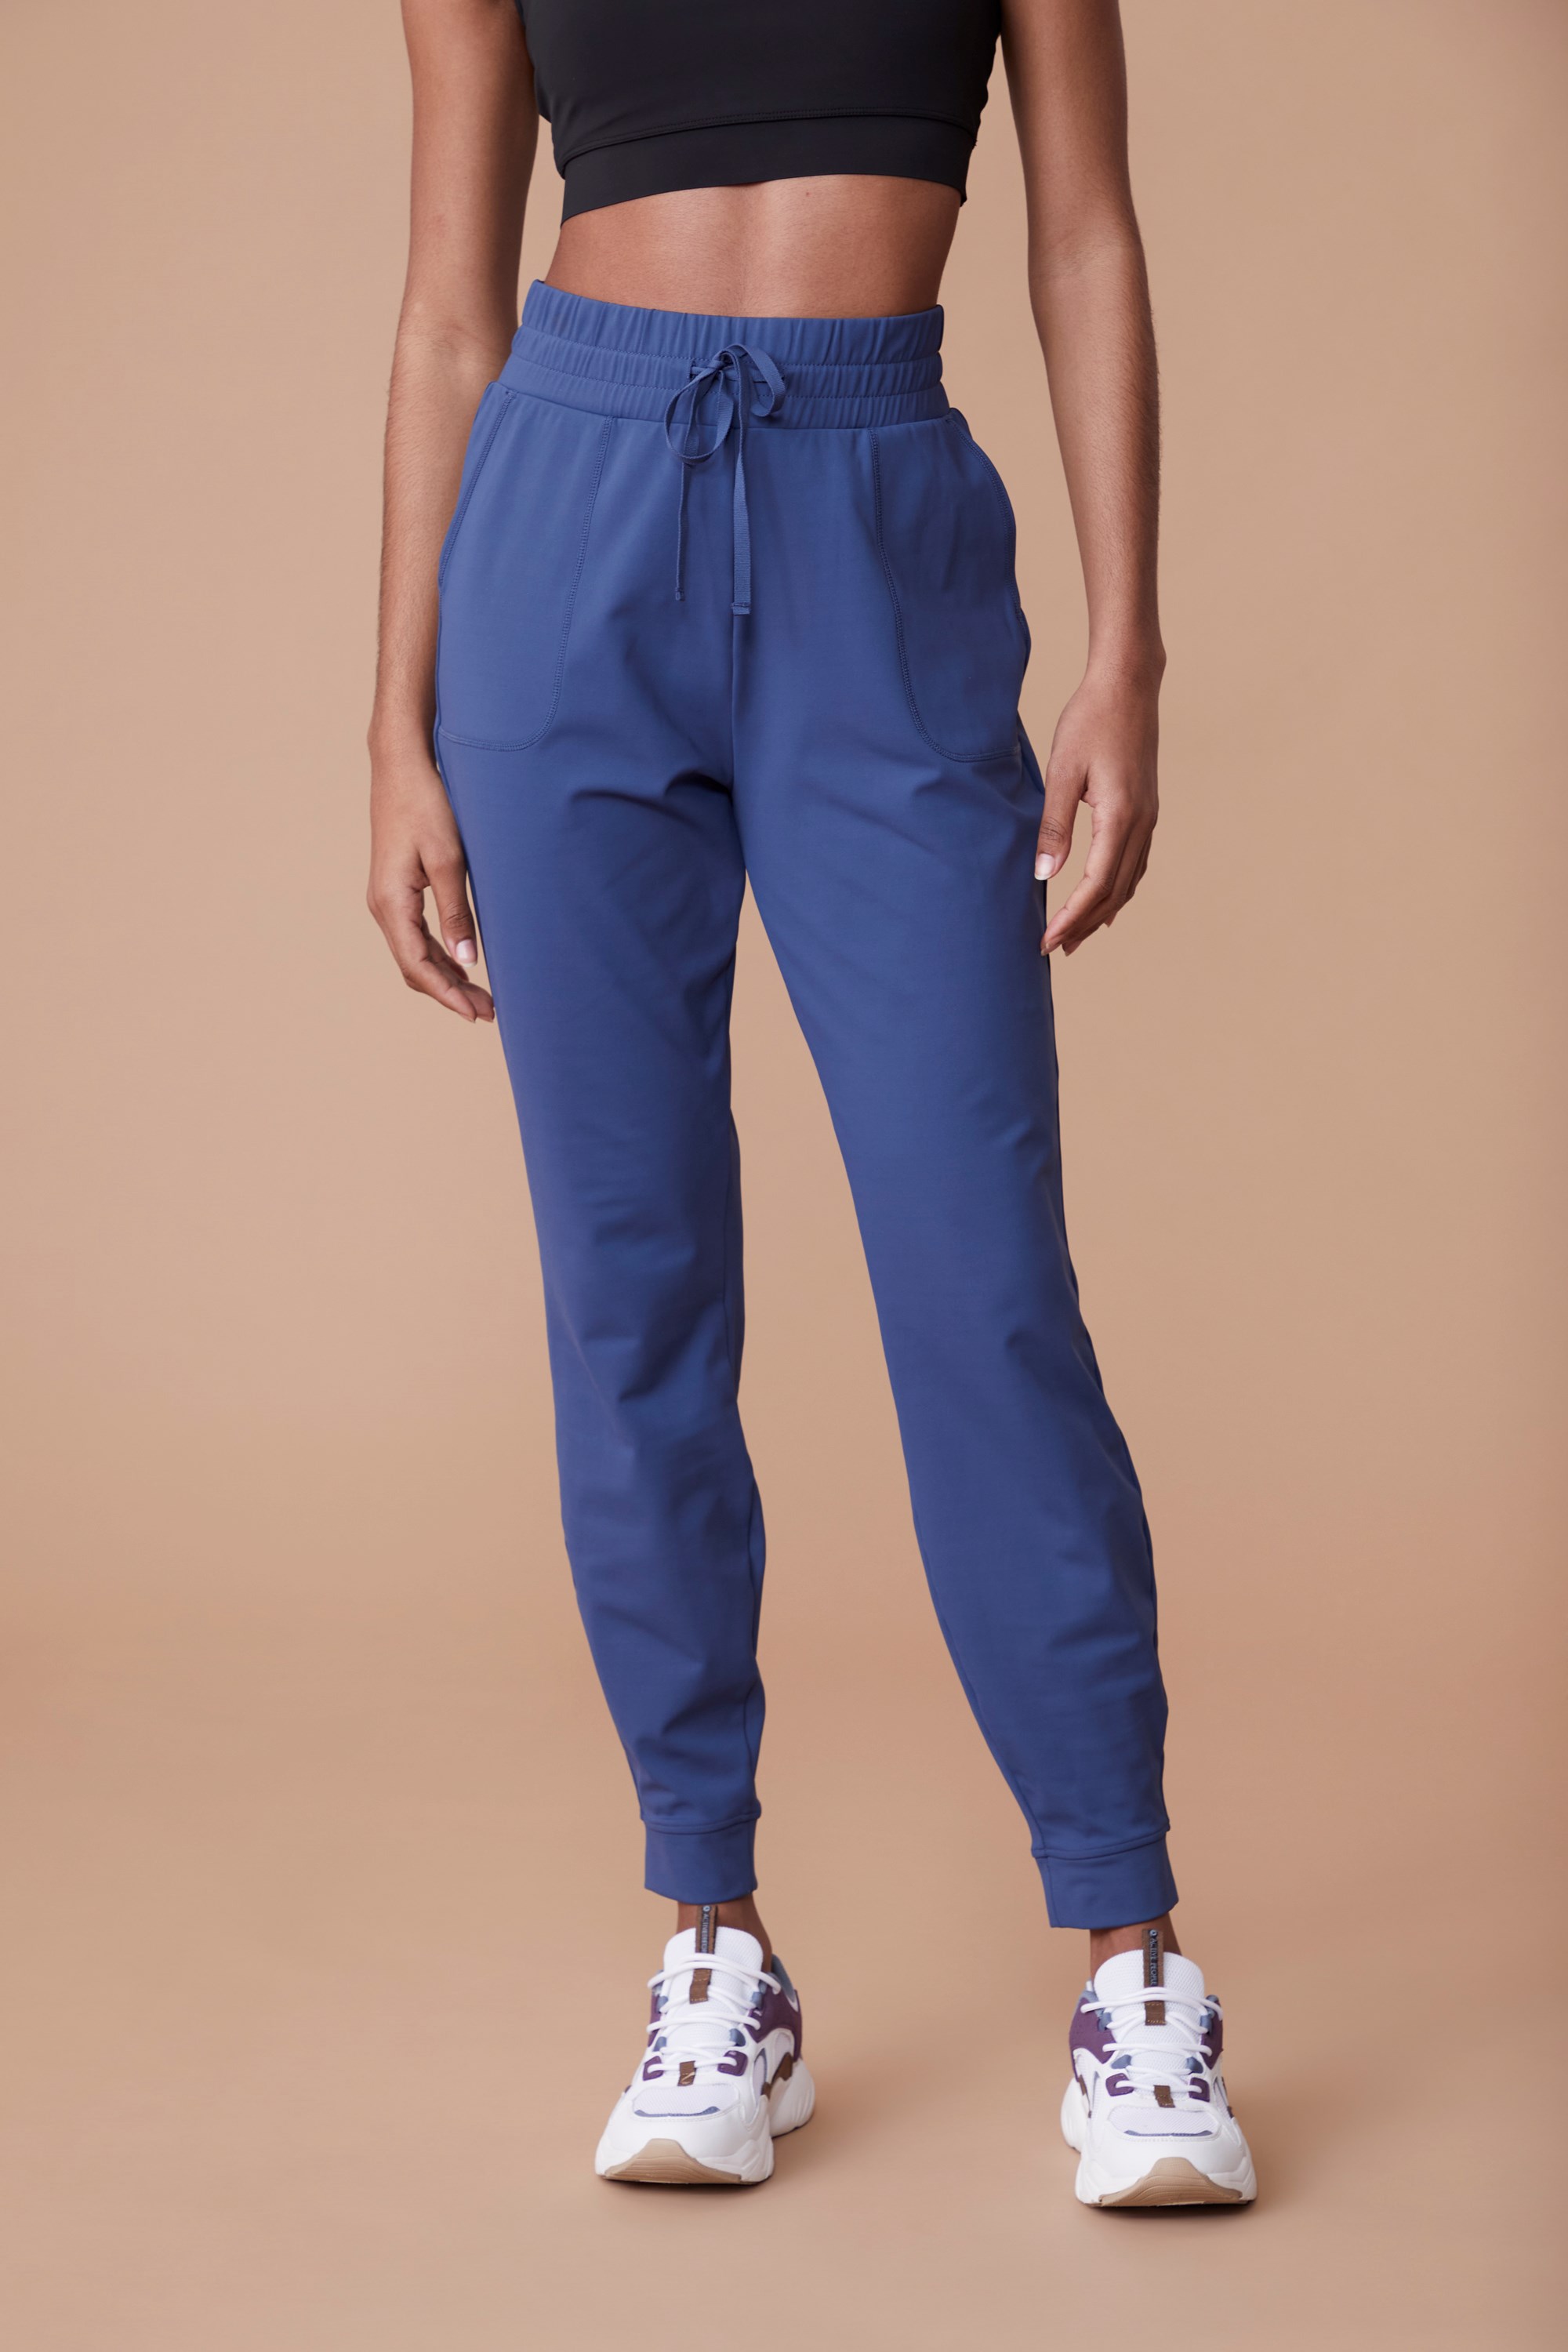 Get Frilled Waist Belt Tie Solid Trousers at  699  LBB Shop